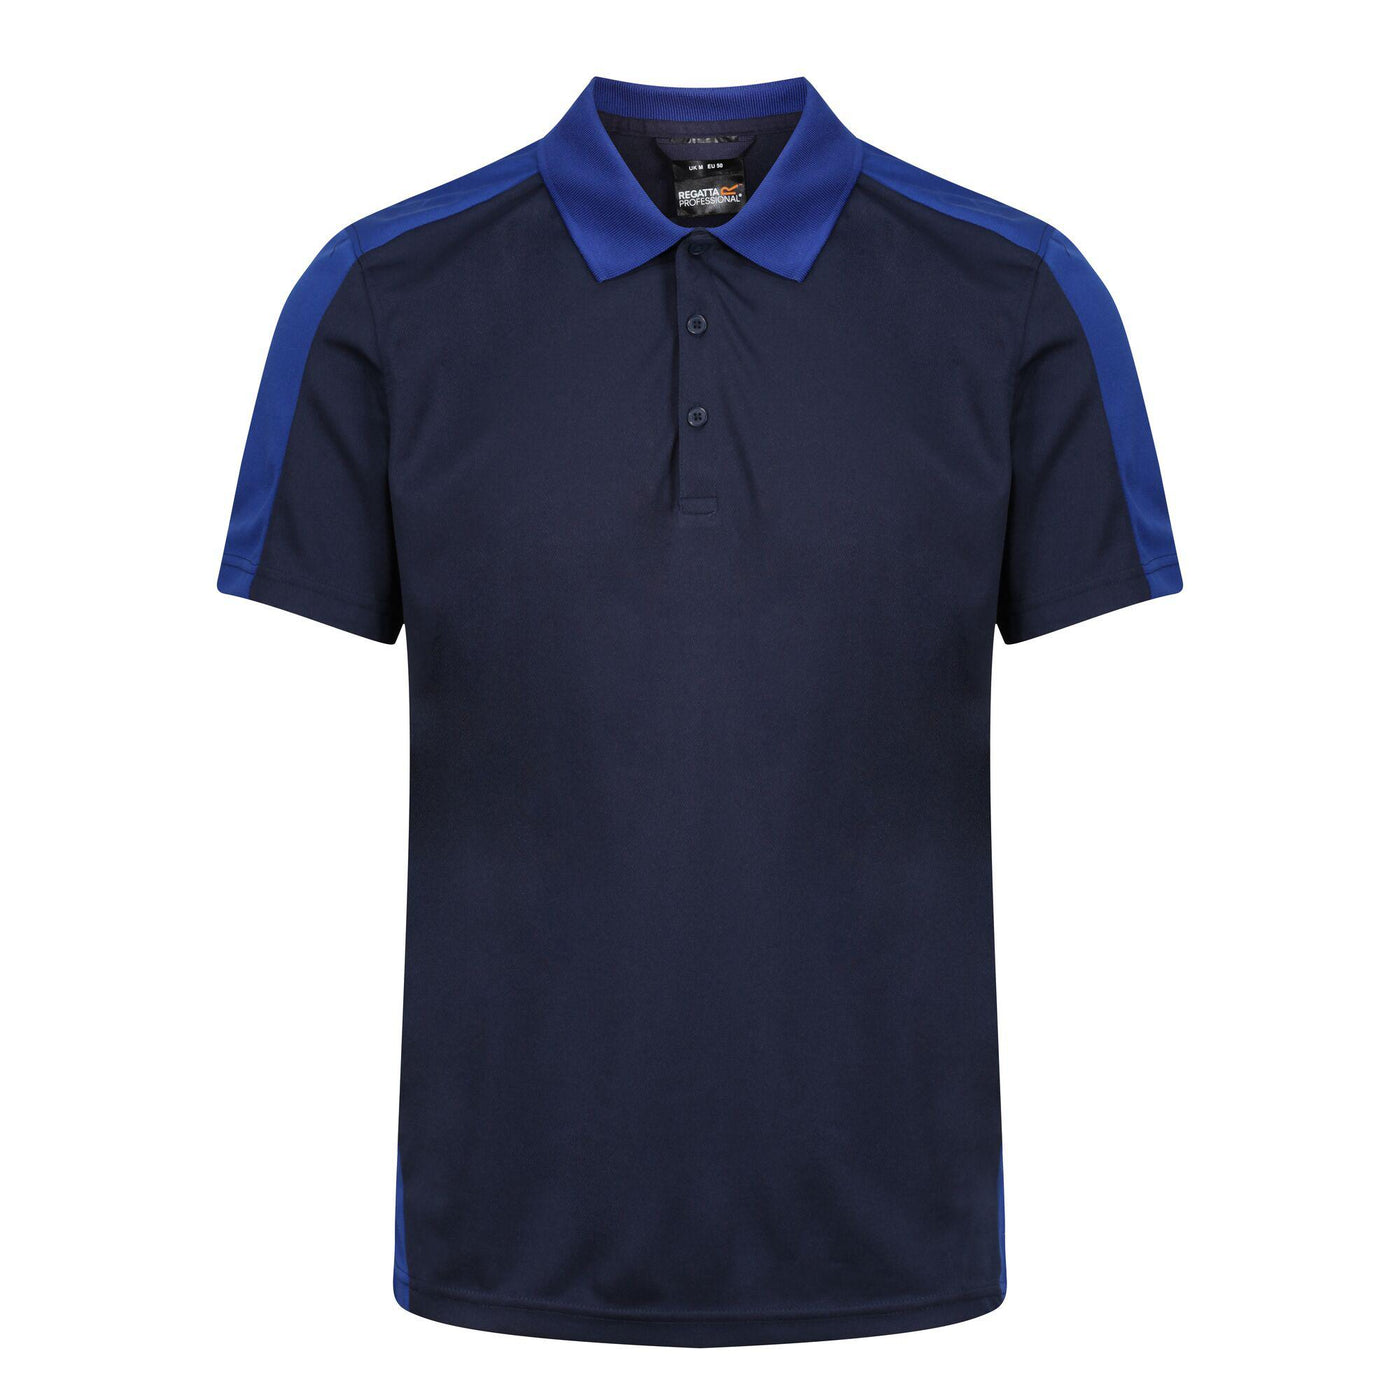 Regatta Professional Mens Contrast Coolweave Quick Wicking Polo Shirt Navy New Royal Blue 1#colour_navy-new-royal-blue